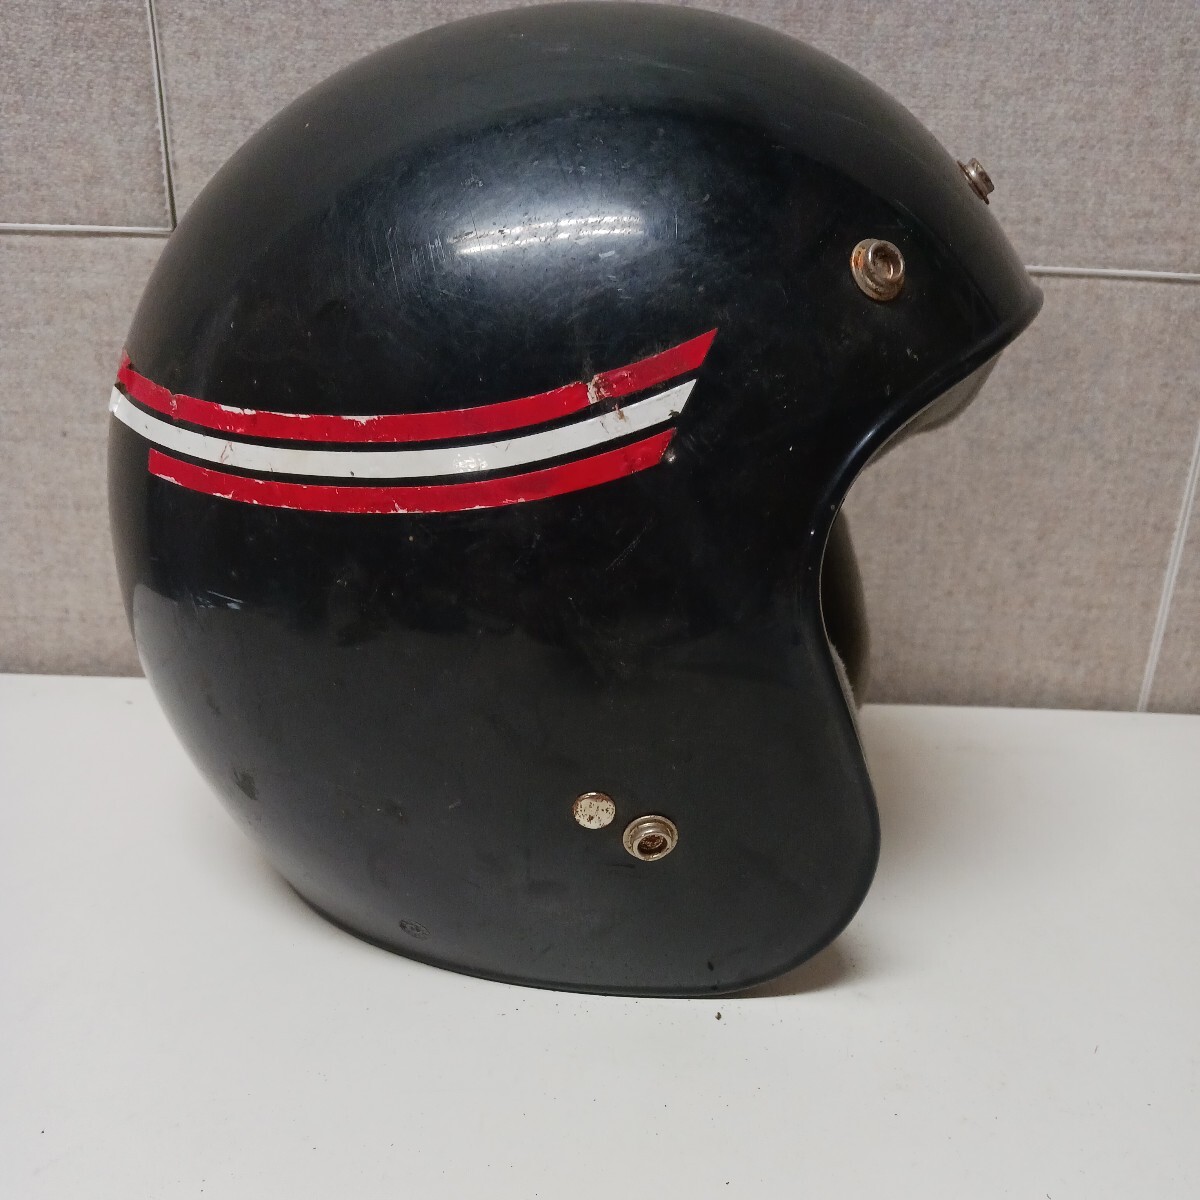  jet helmet Vintage that time thing boeri 59 60 Italy made helmet Vintage cheap selling out start t